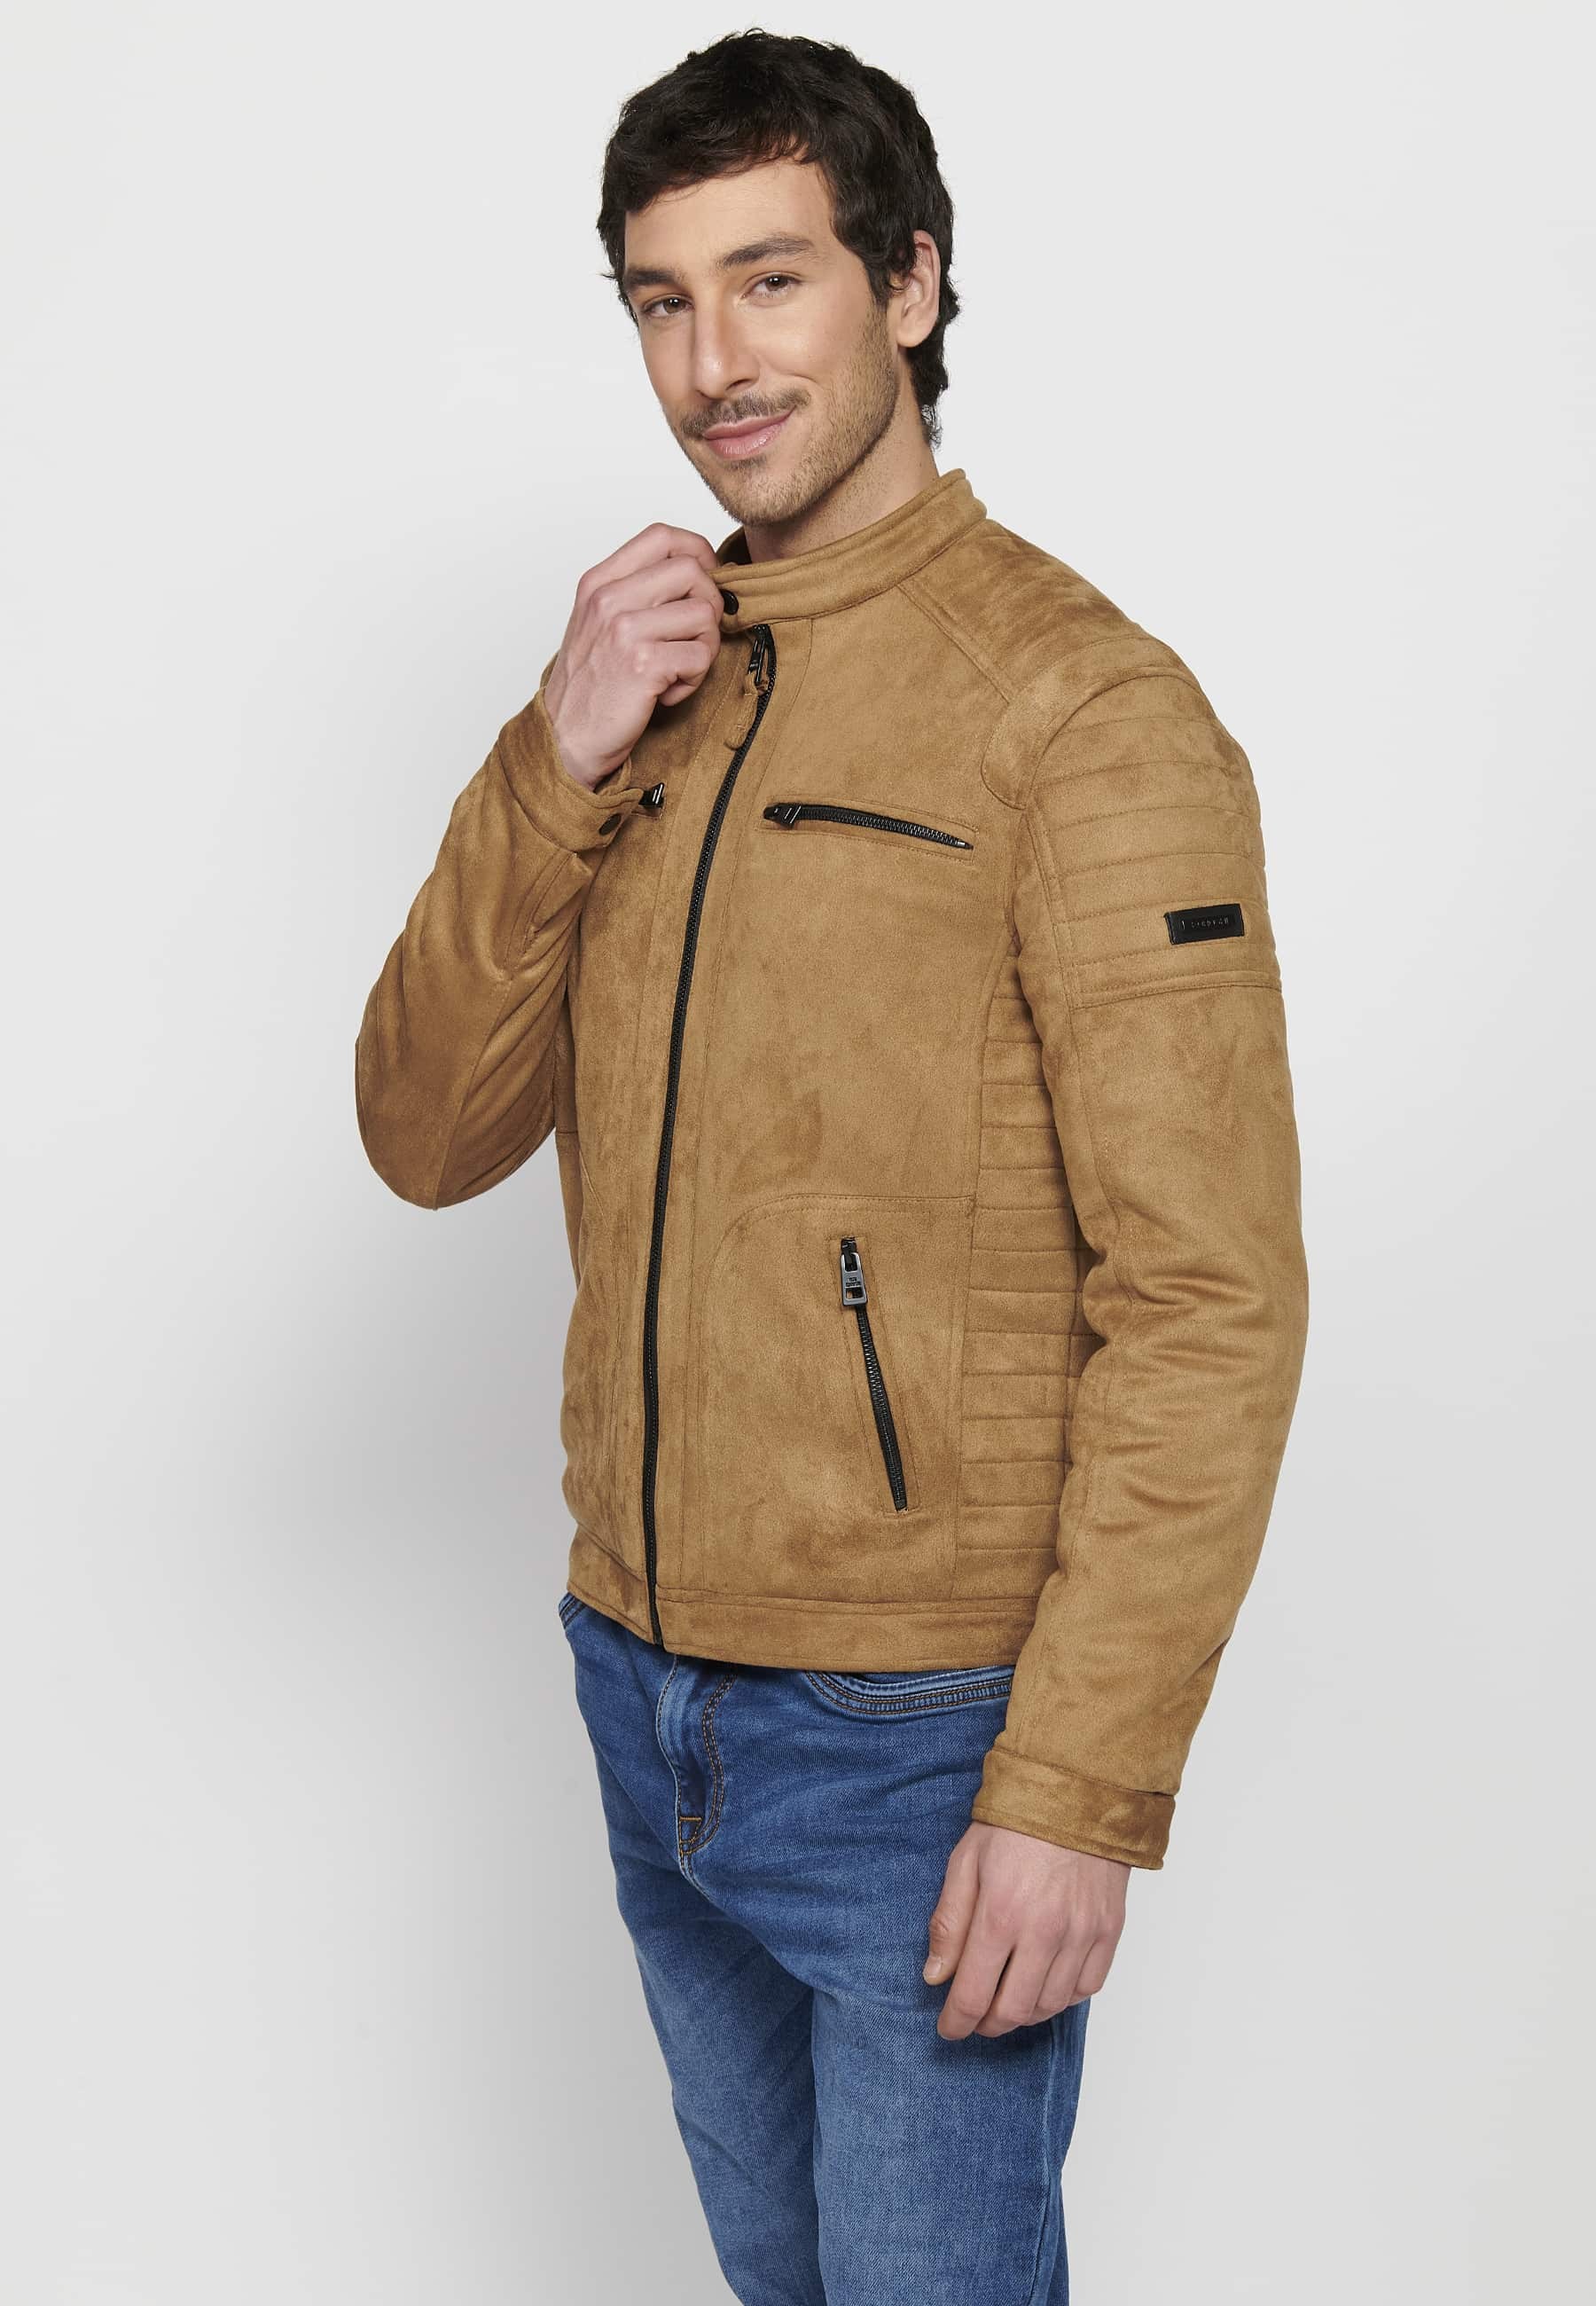 Men's Long Sleeve Jacket with Round Neck and Zipper Front Closure with Four Pockets in Tan Color 1